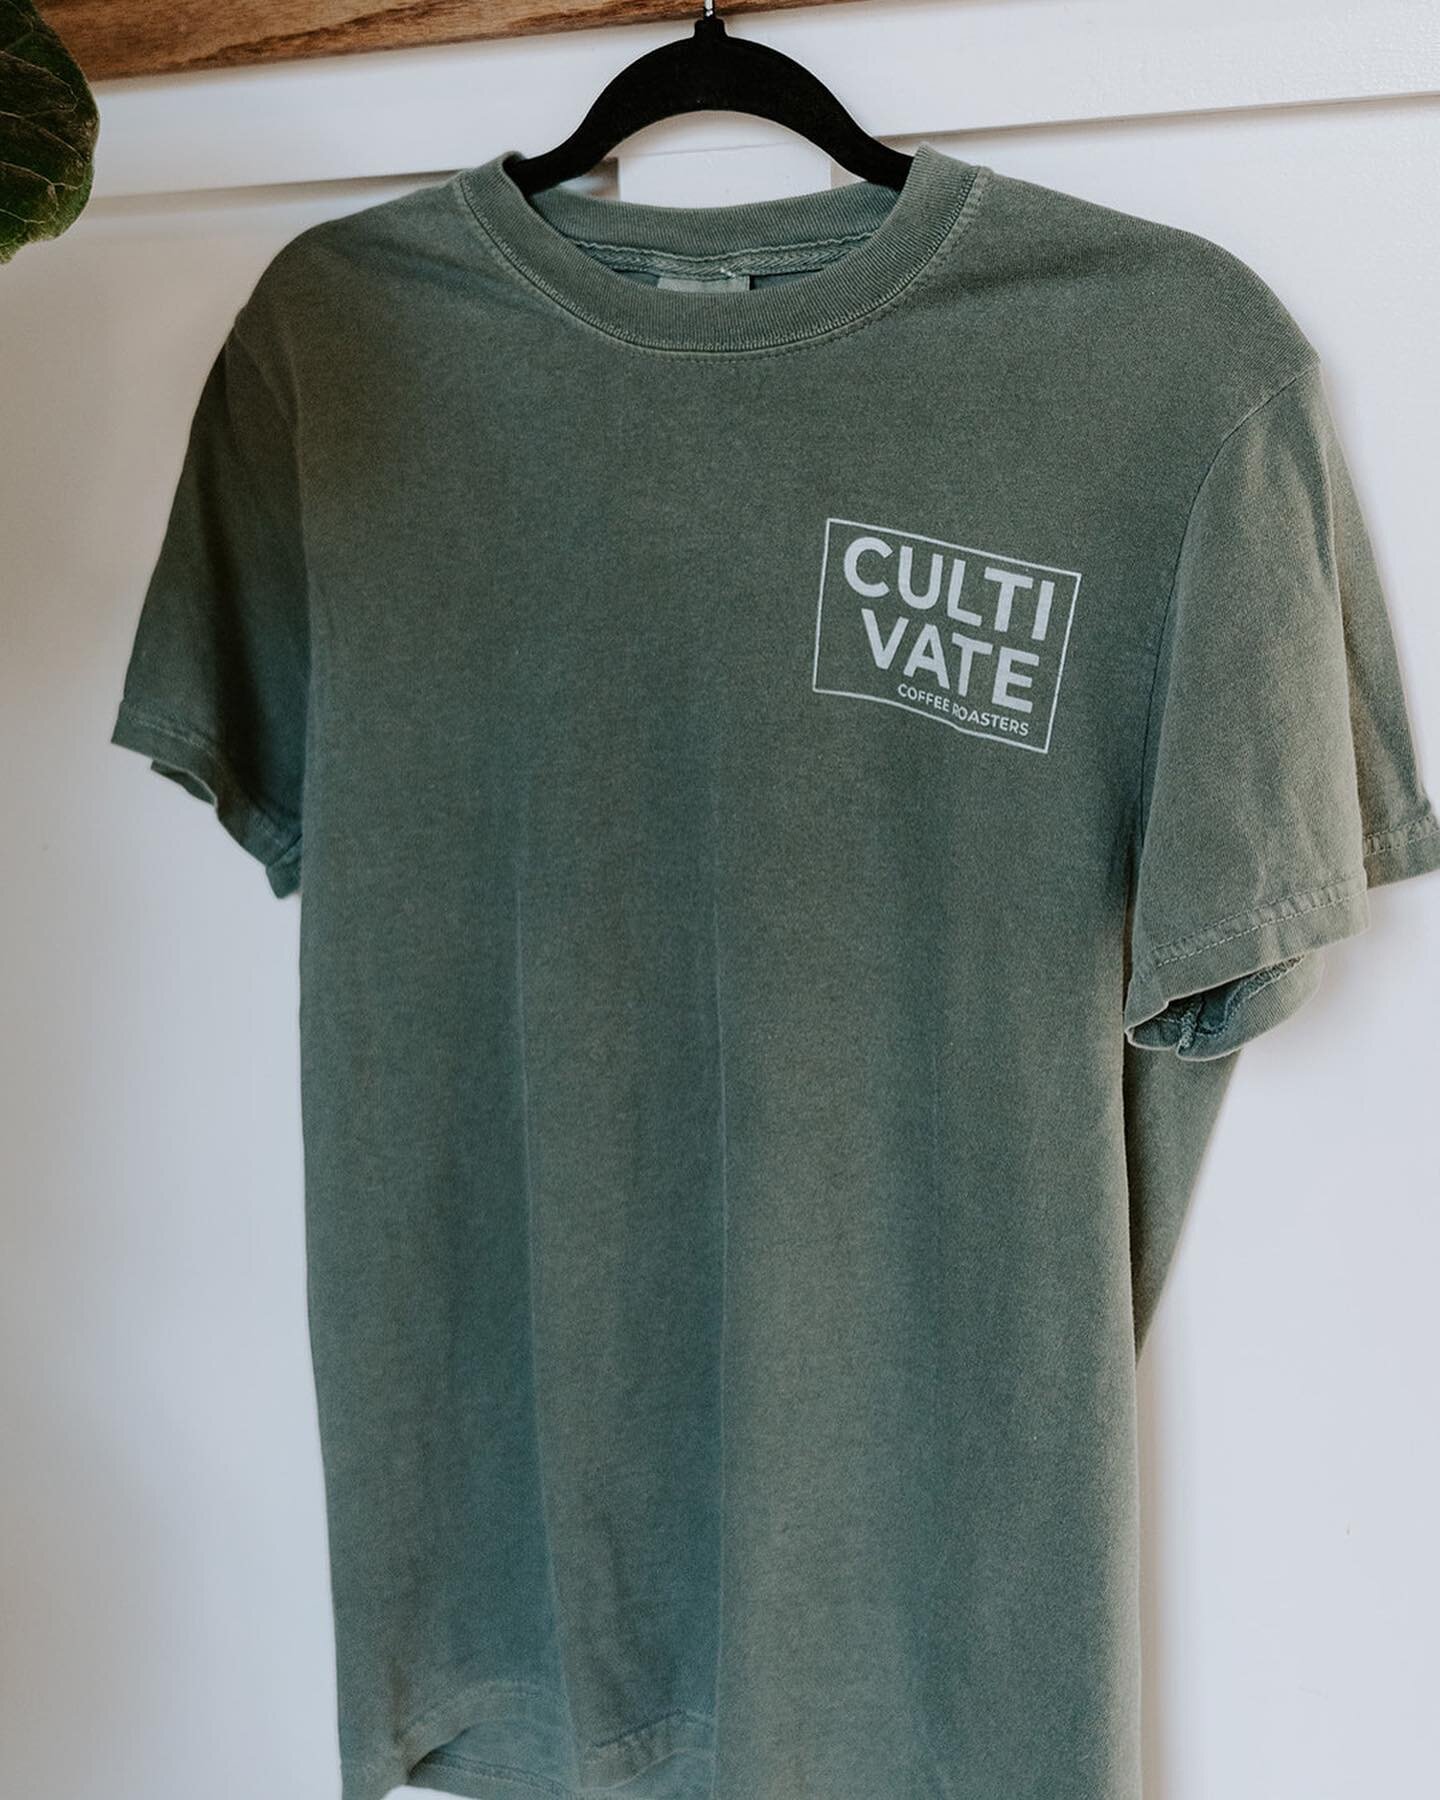 If you still need a last minute Mother&rsquo;s Day gift, stop in the shop and fill up a Cultivate tote bag with all of her local coffee shop favorites like a t-shirt (available in the 4 colors pictured), mug, cute baseball cap and her favorite bagged